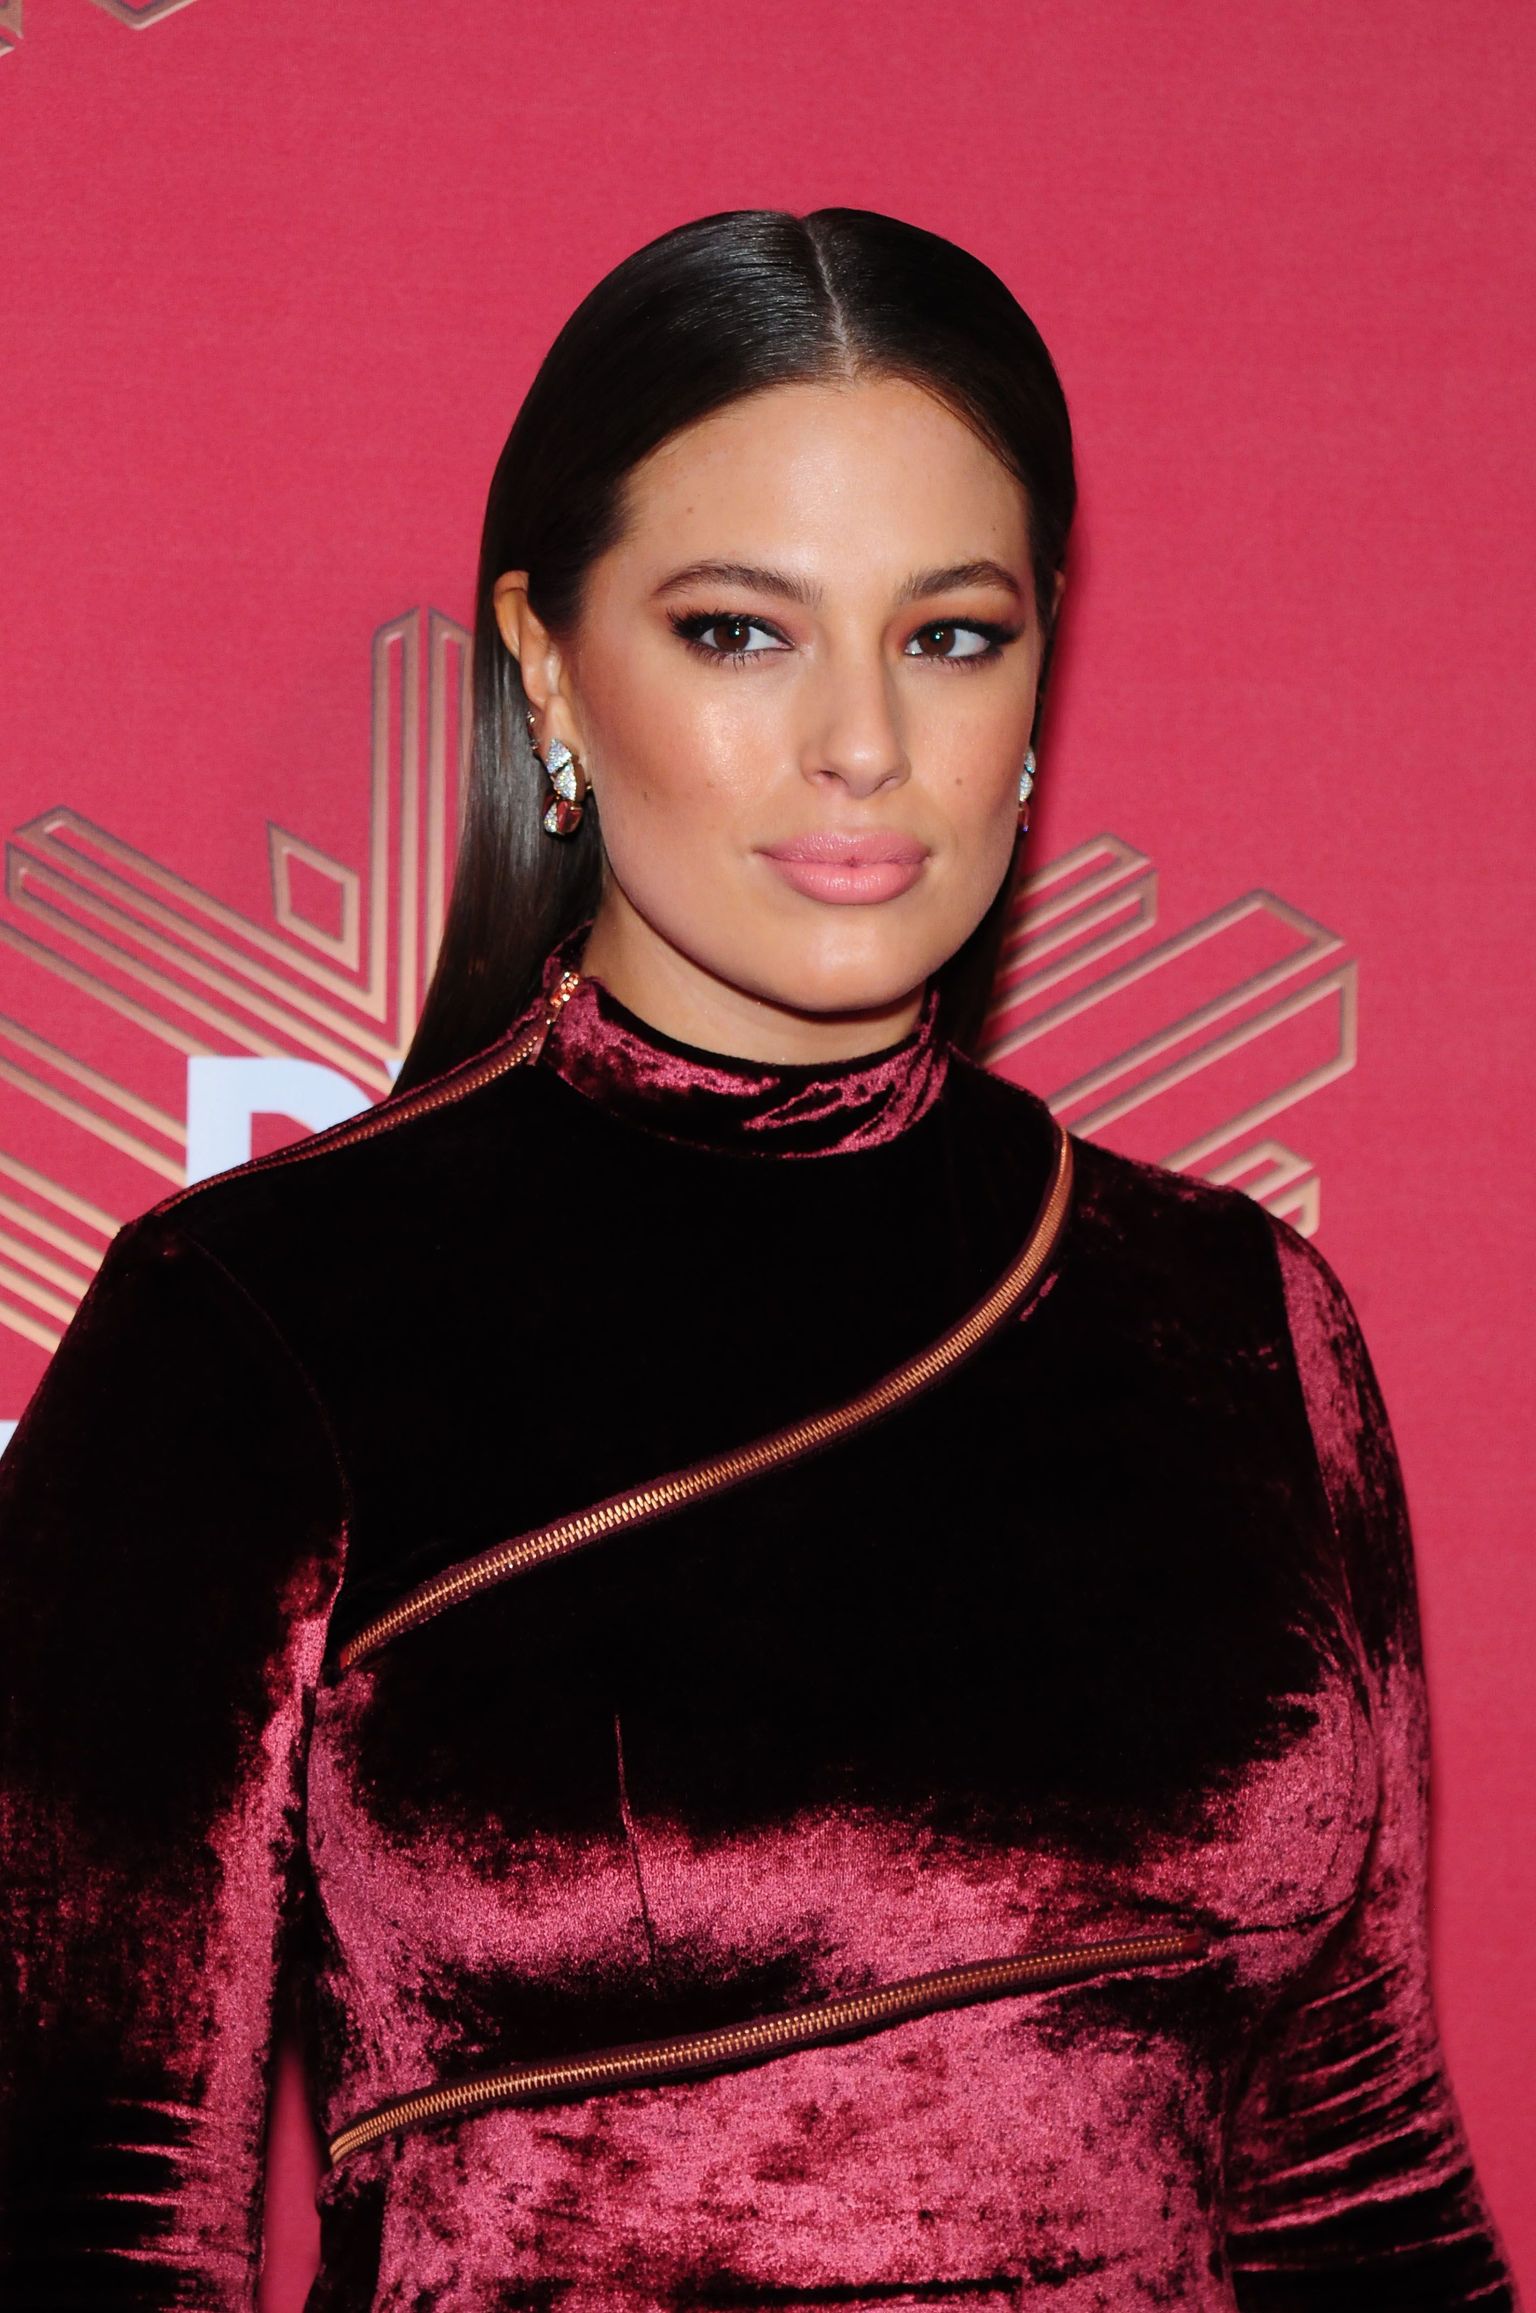 Ashley Graham arriving on the red carpet for VH1 Divas Holiday held at King's Theater in New York, NY  on December 2, 2016. (Photo by PseudoImage/Shooting Star) *** Please Use Credit from Credit Field ***